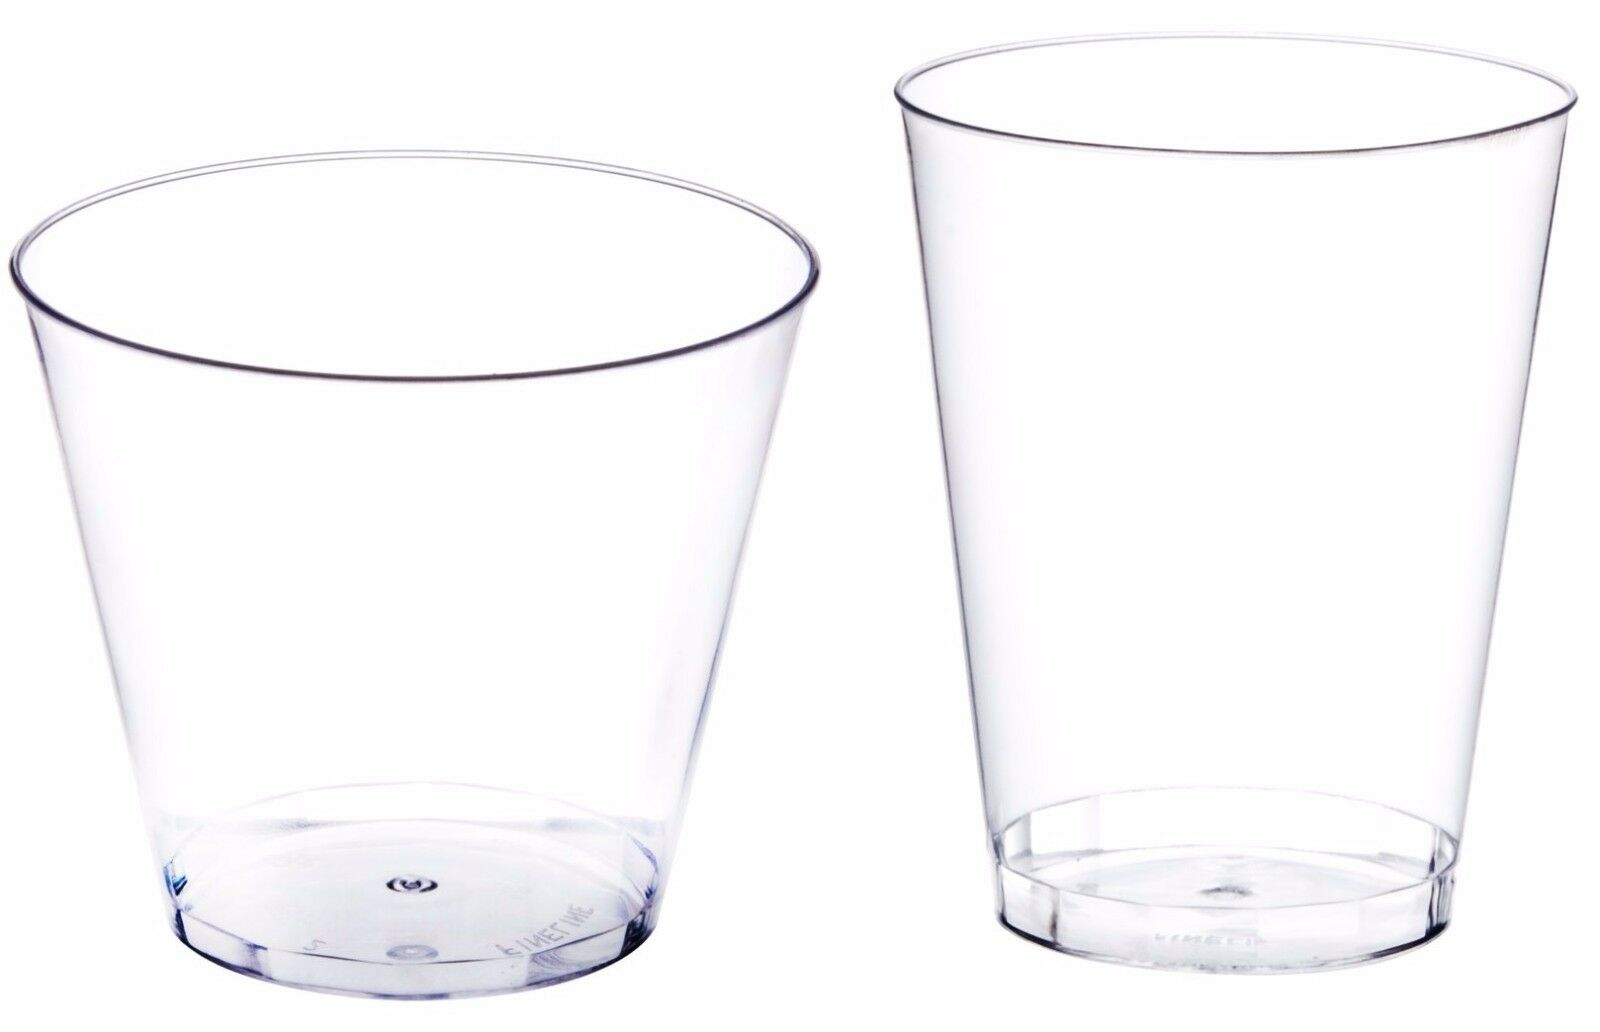 Clear Disposable Hard Plastic Cups- 5 Sizes - Rigid Tumbler Glasses Bar Catering